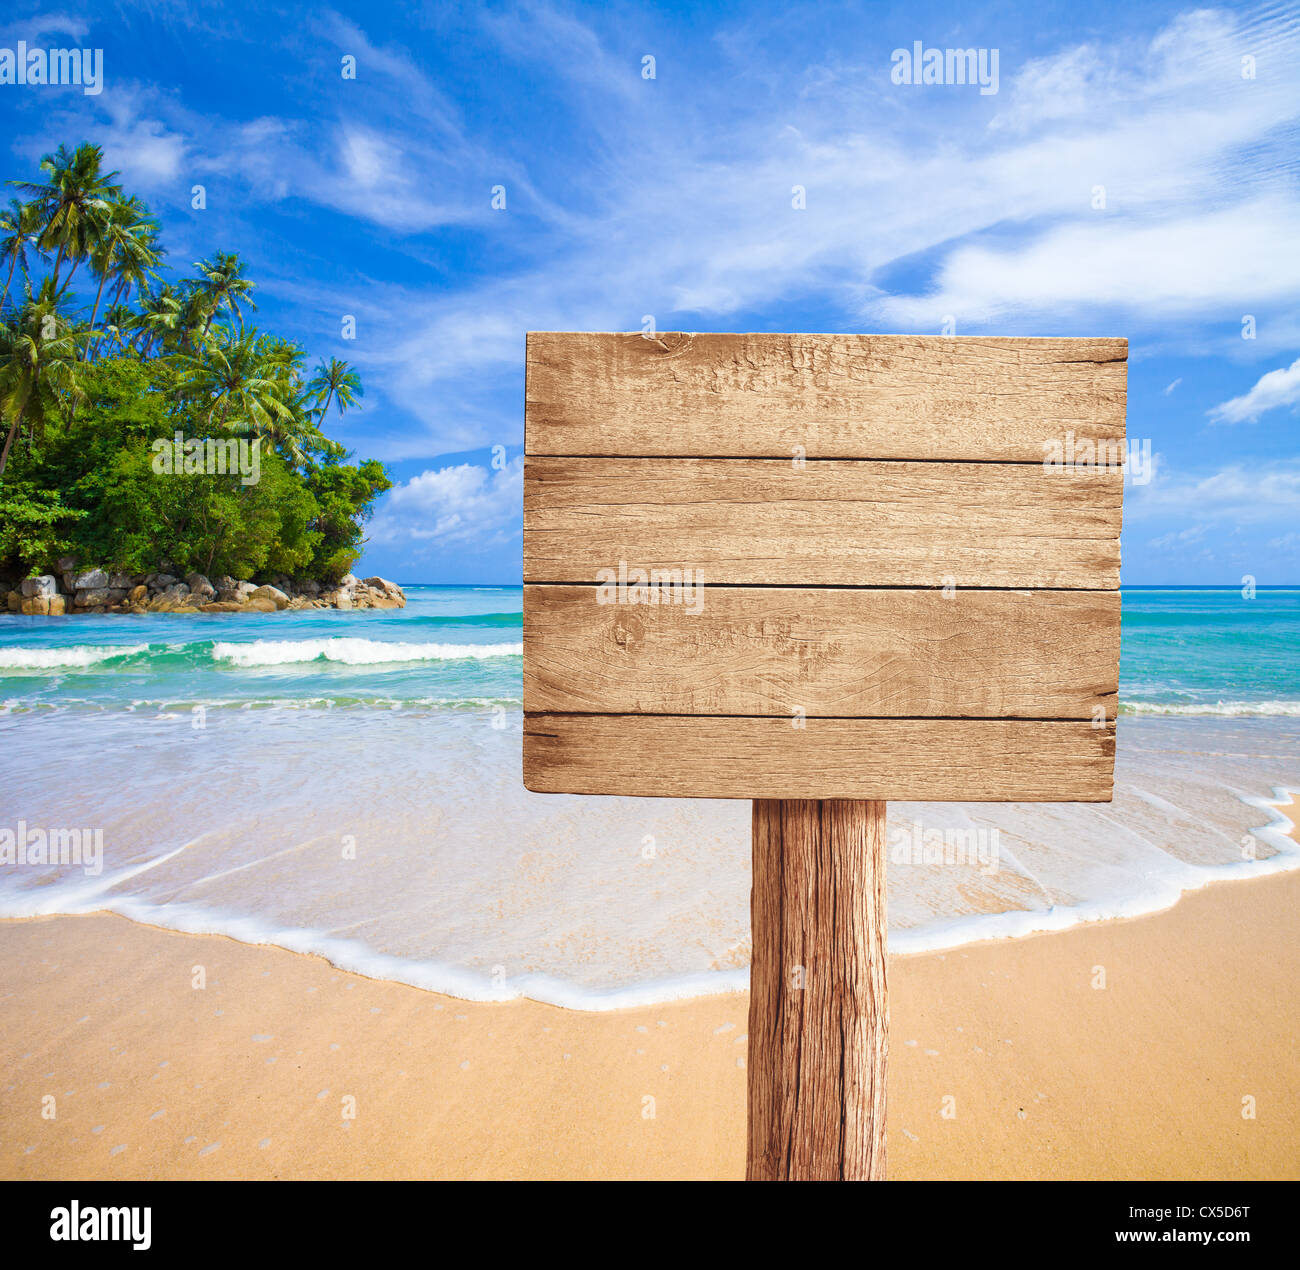 wooden signboard on tropical beach Stock Photo